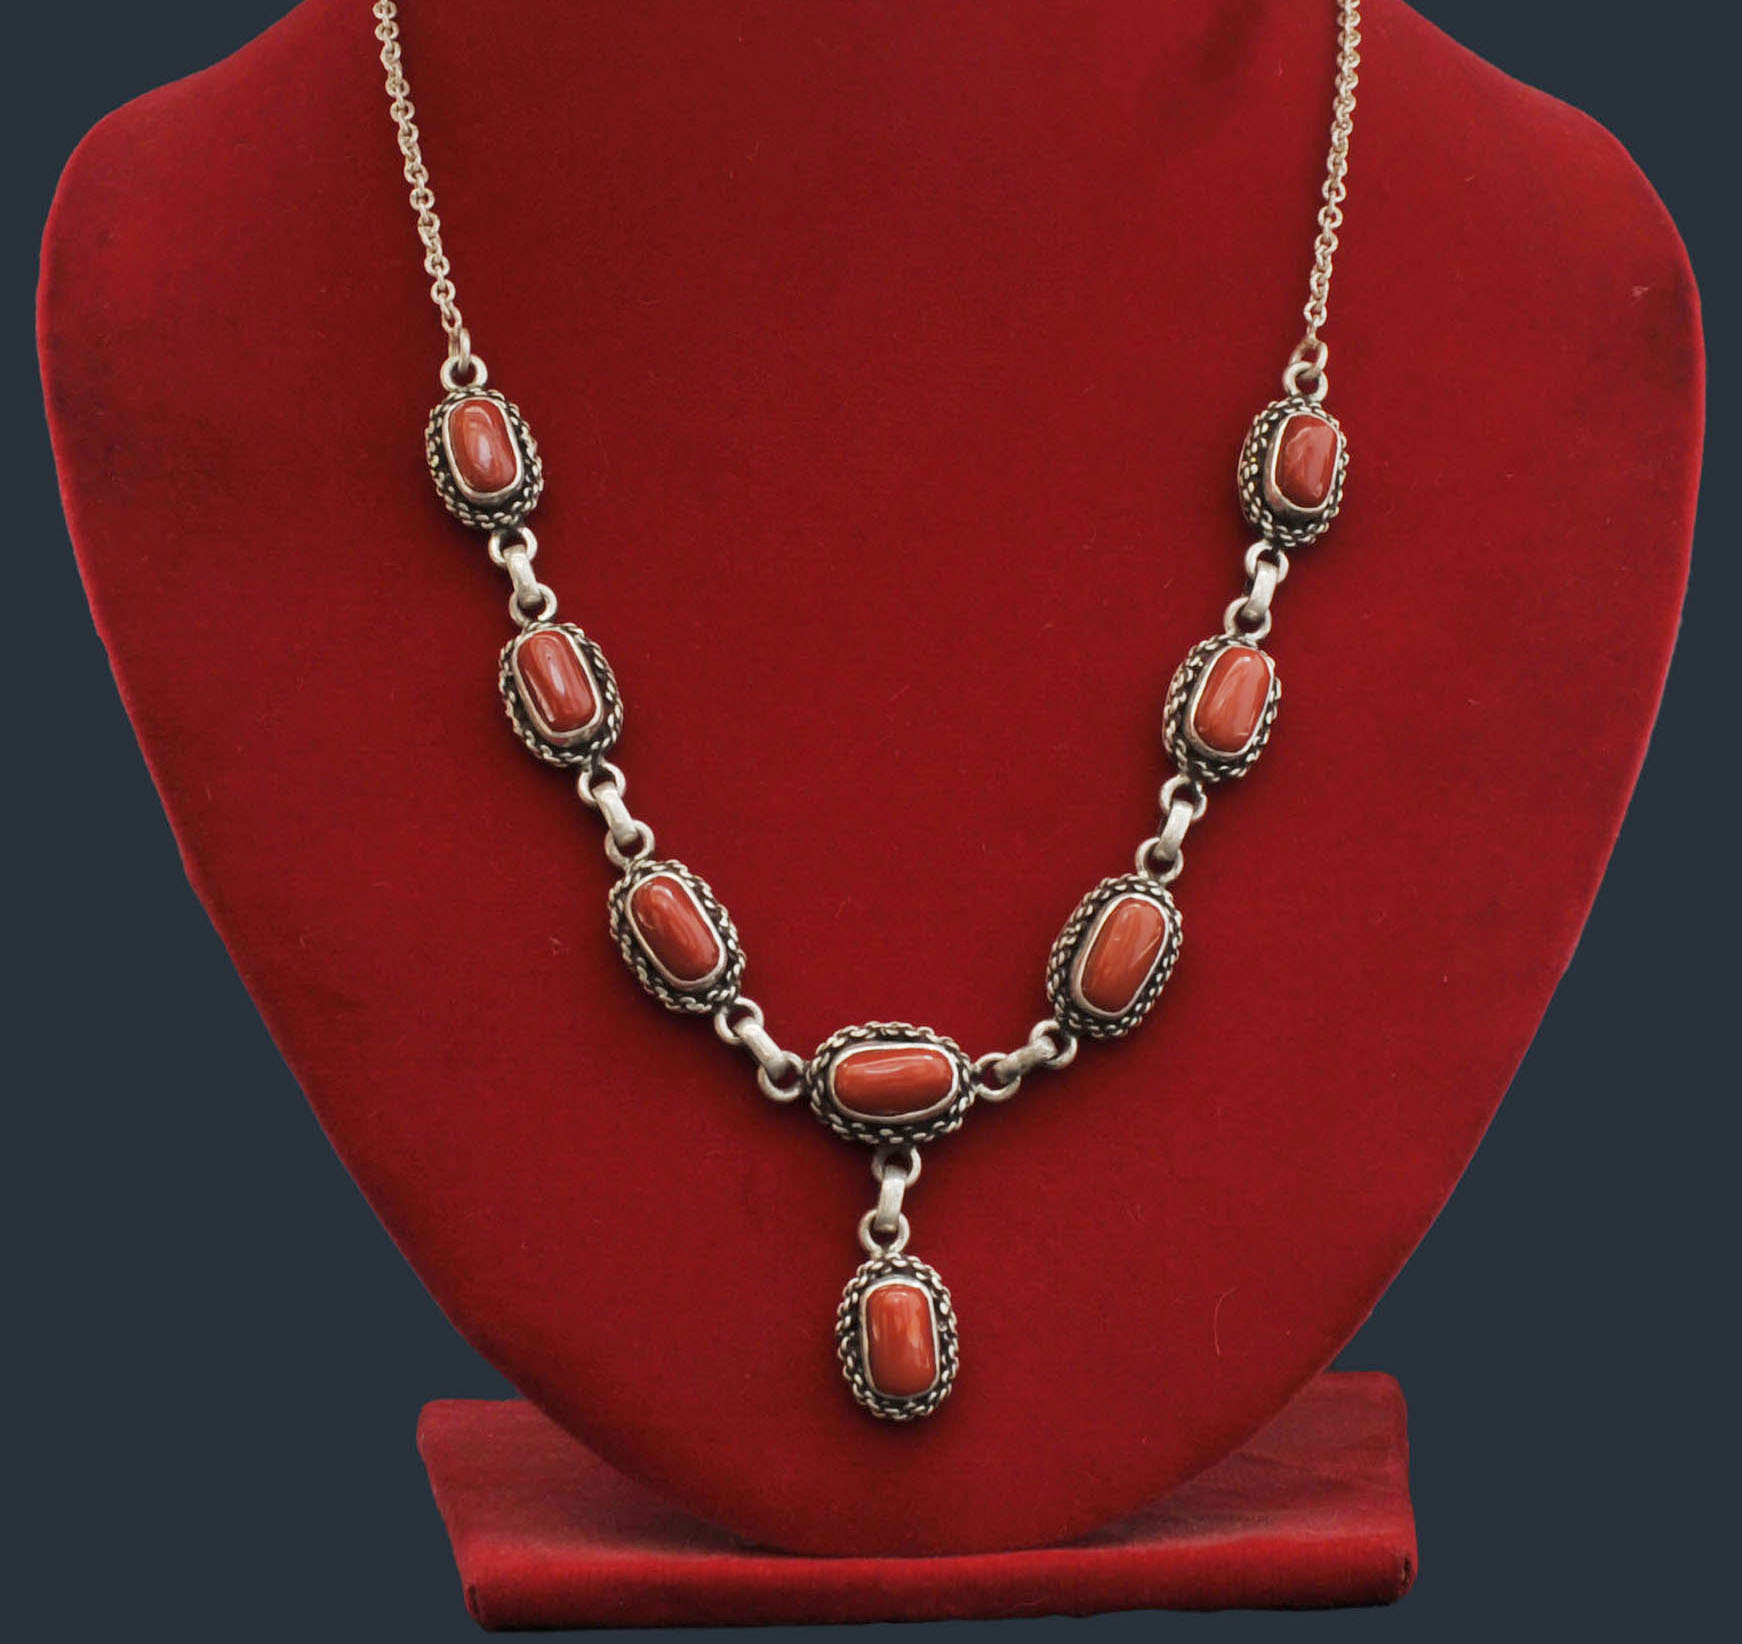 Designer Silver Necklace Of Eight Red Stone Design (red Coral).